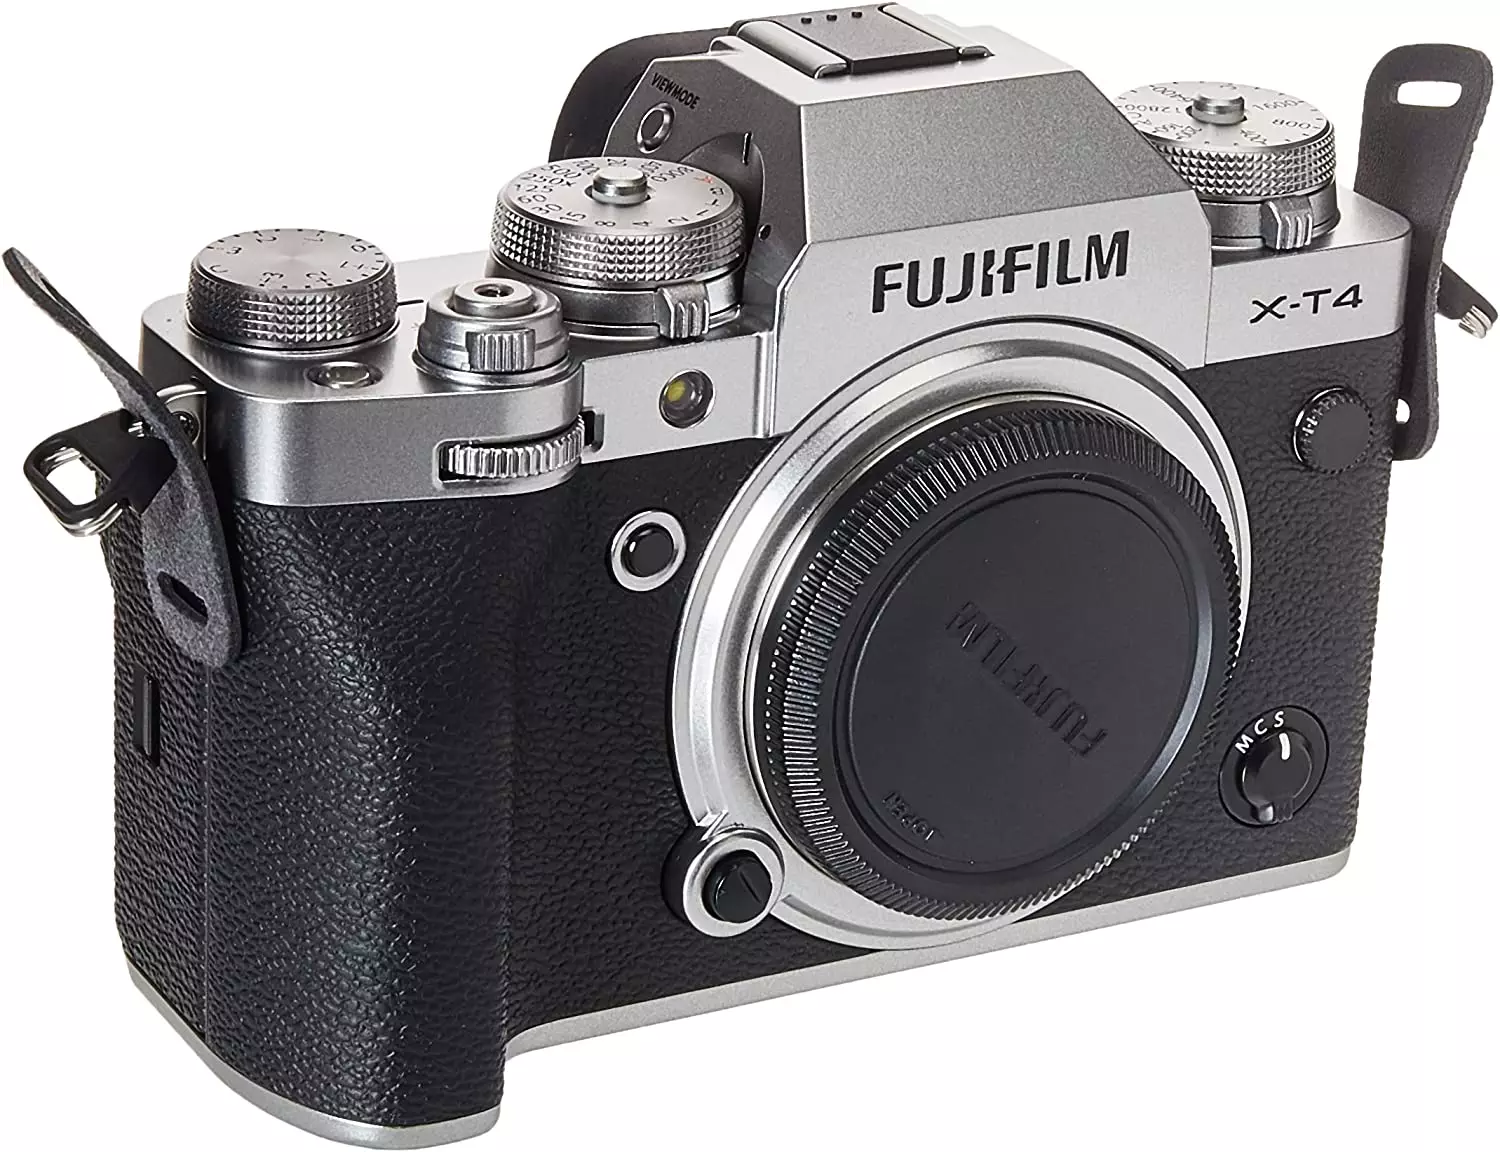 This Epic And All New Fujifilm Xt4 Mirrorless Camera Is Taking Over The Camera World